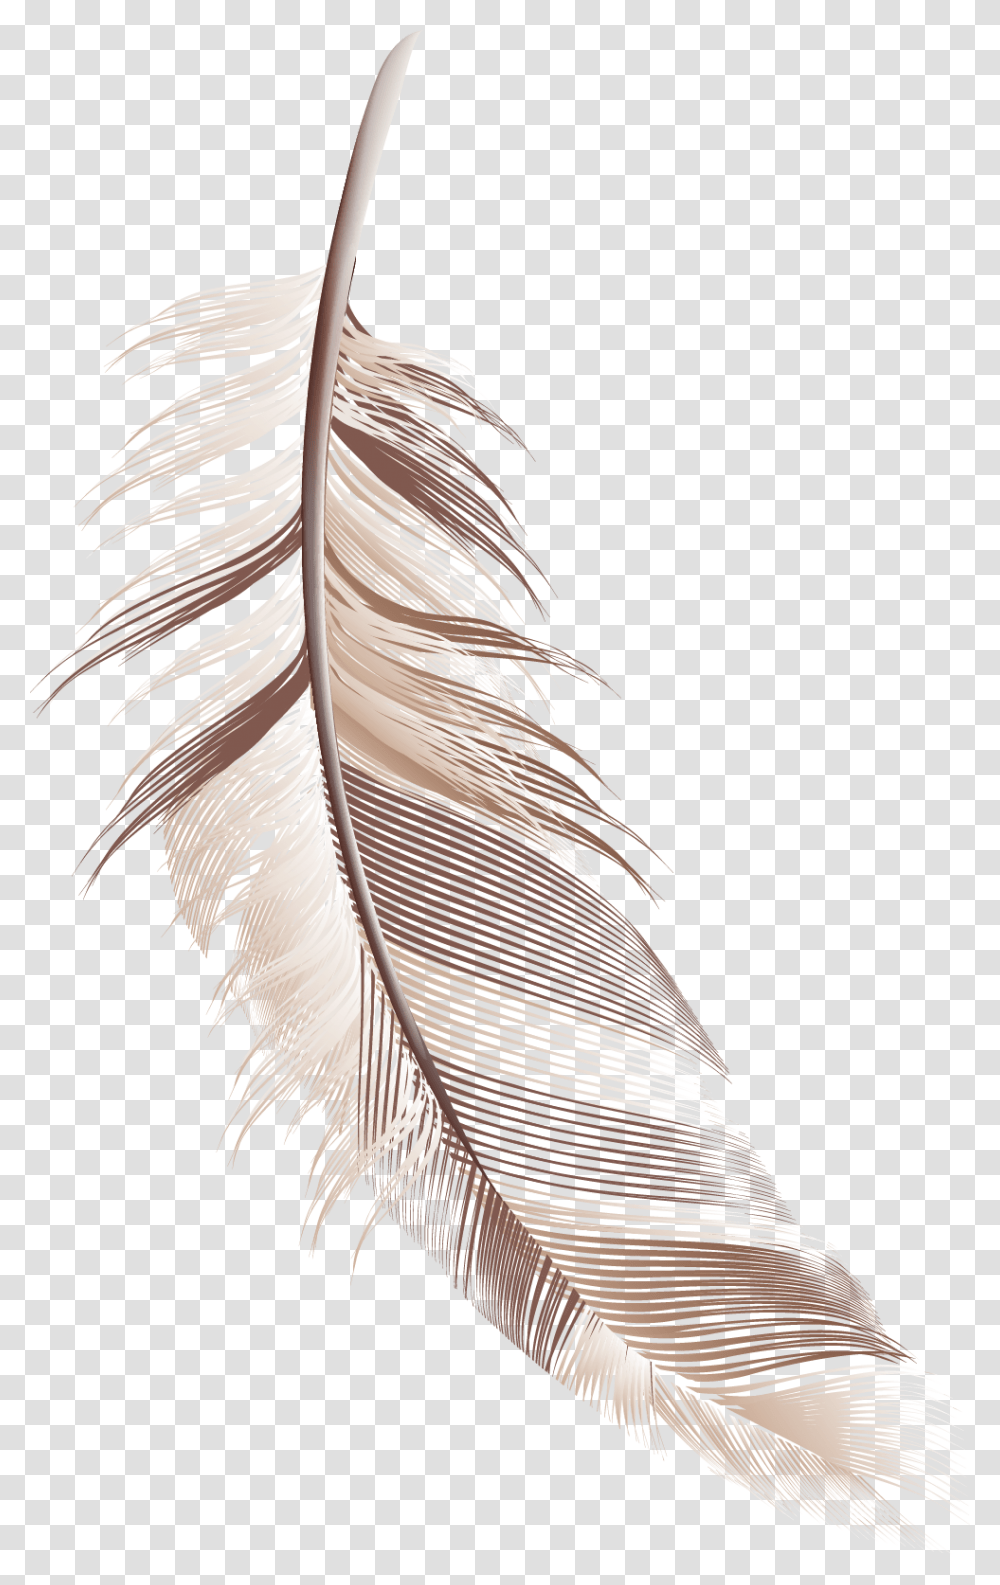 Cartoon Feather Material Download Cartoon Image Of Feather, Bird, Drawing, Sketch Transparent Png